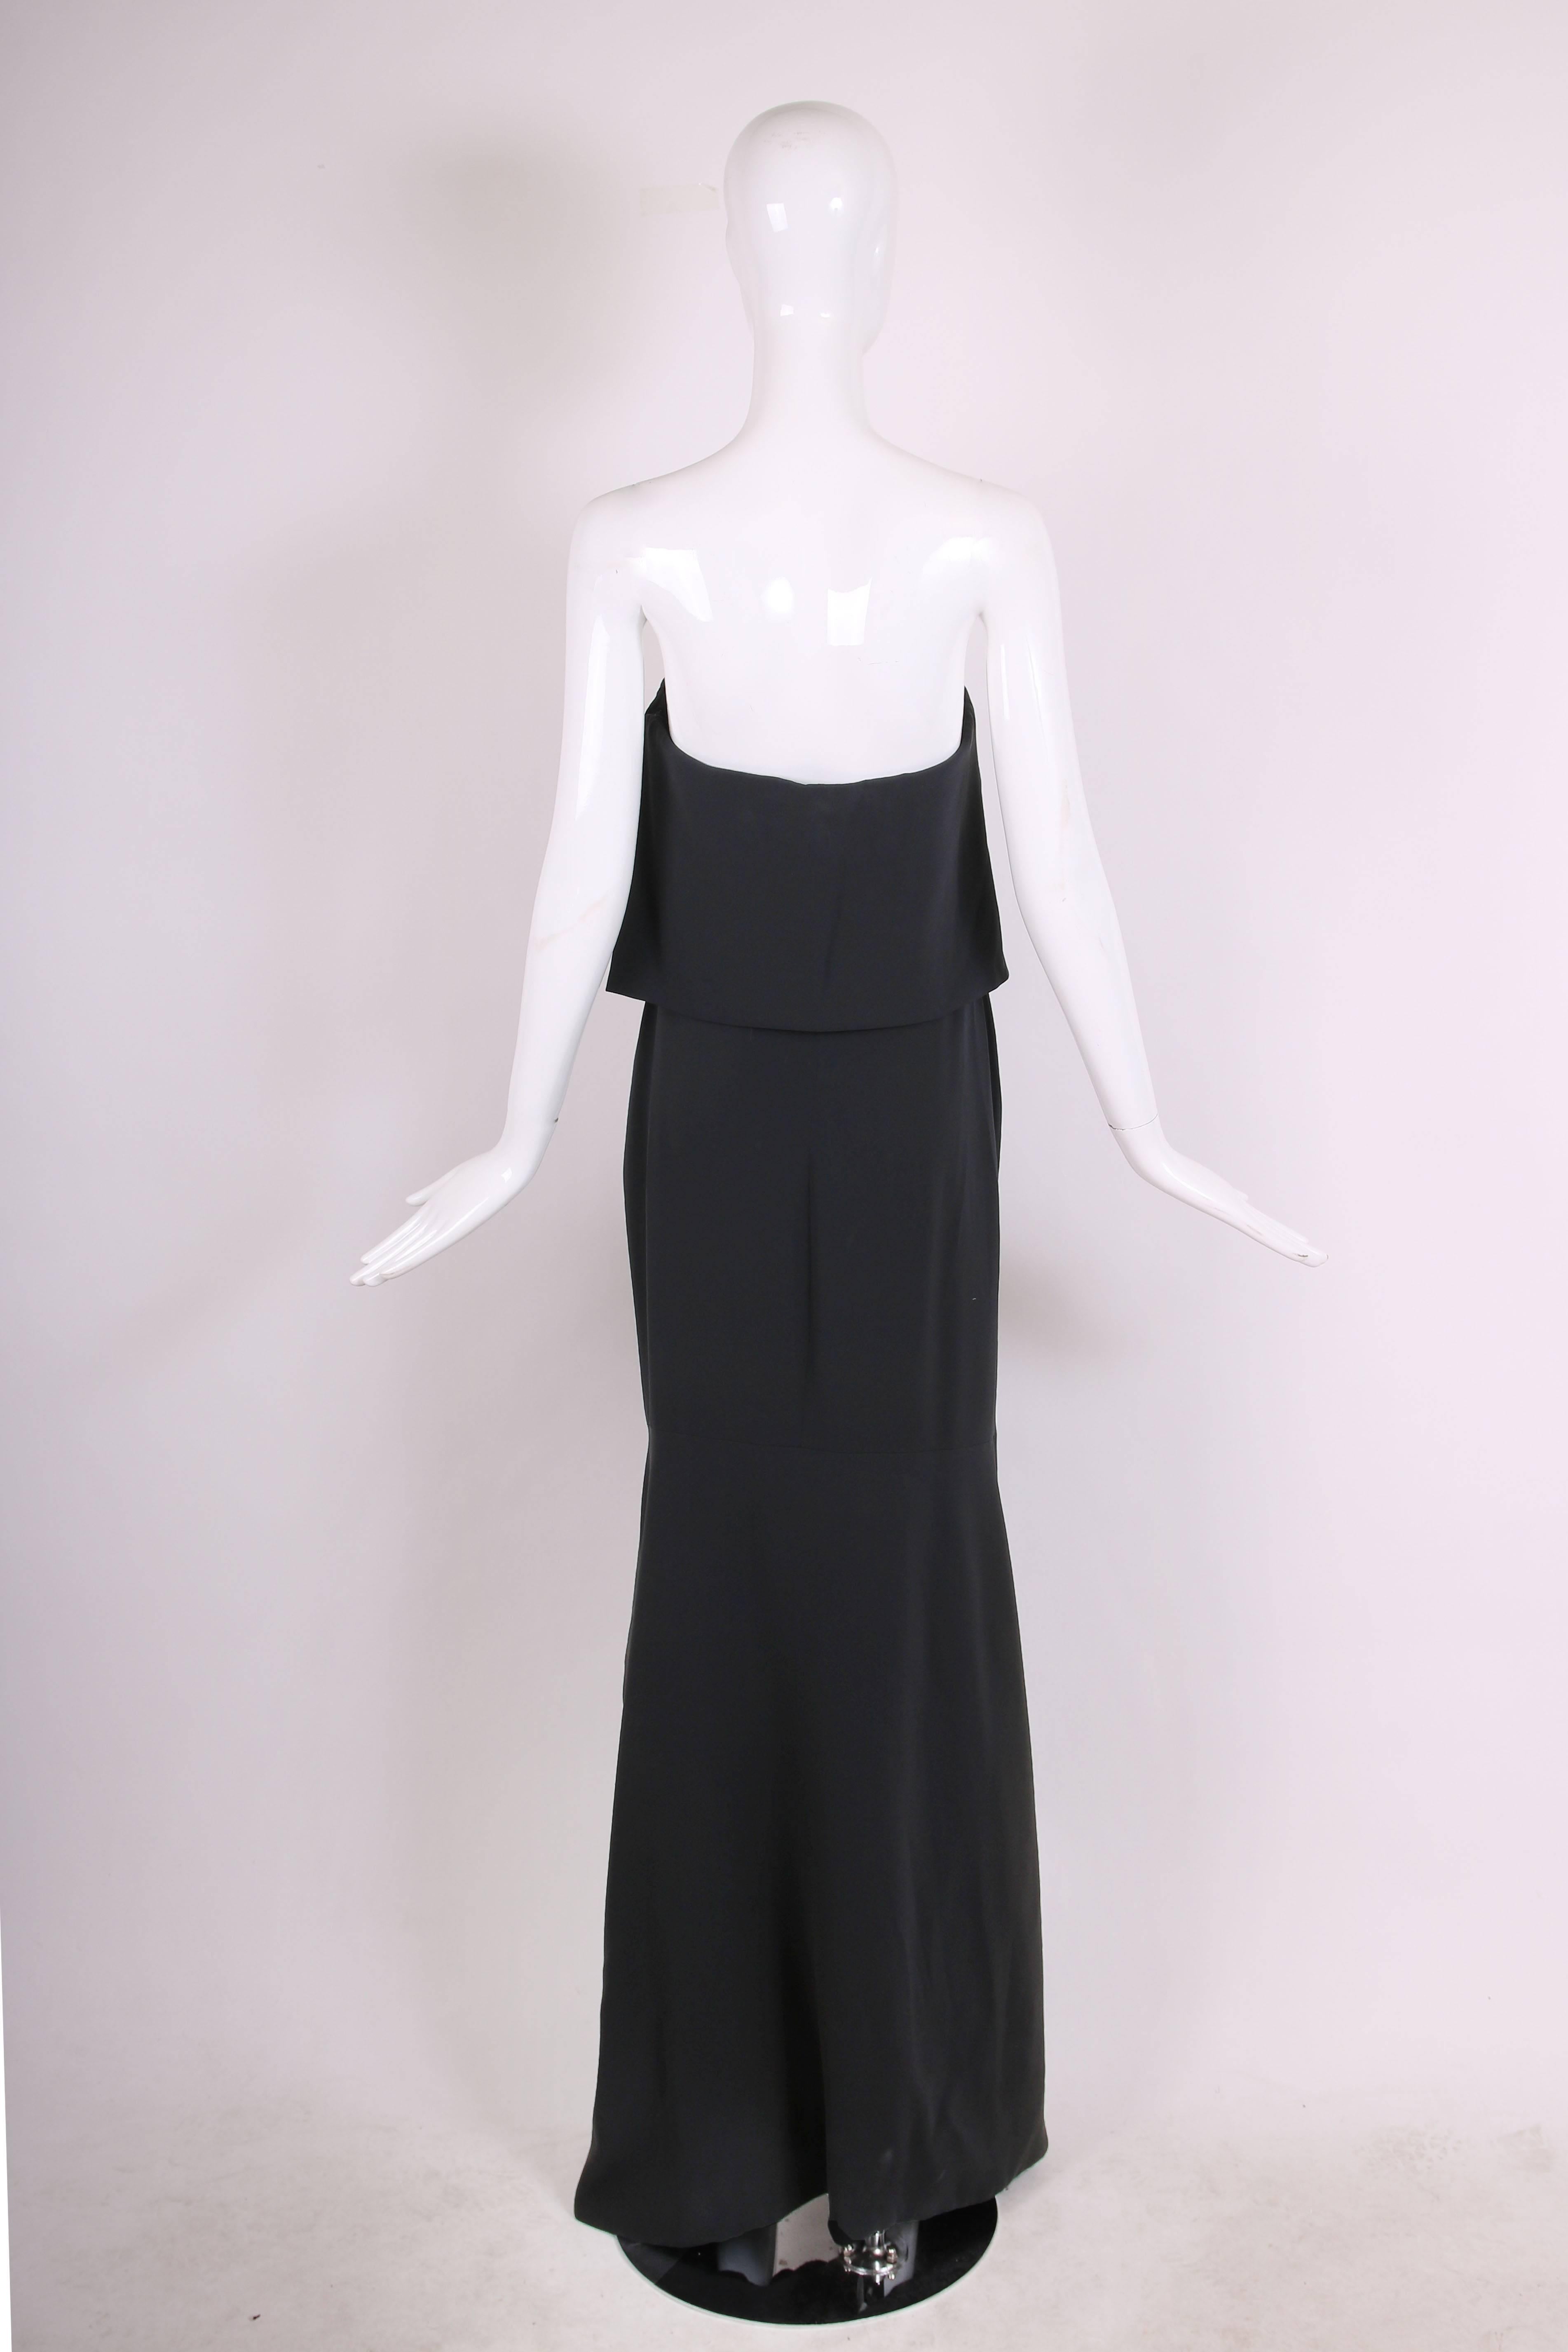 Tom Ford Black Strapless Gown with Ruffled Frontal Slit and Matching Bolero Top 1